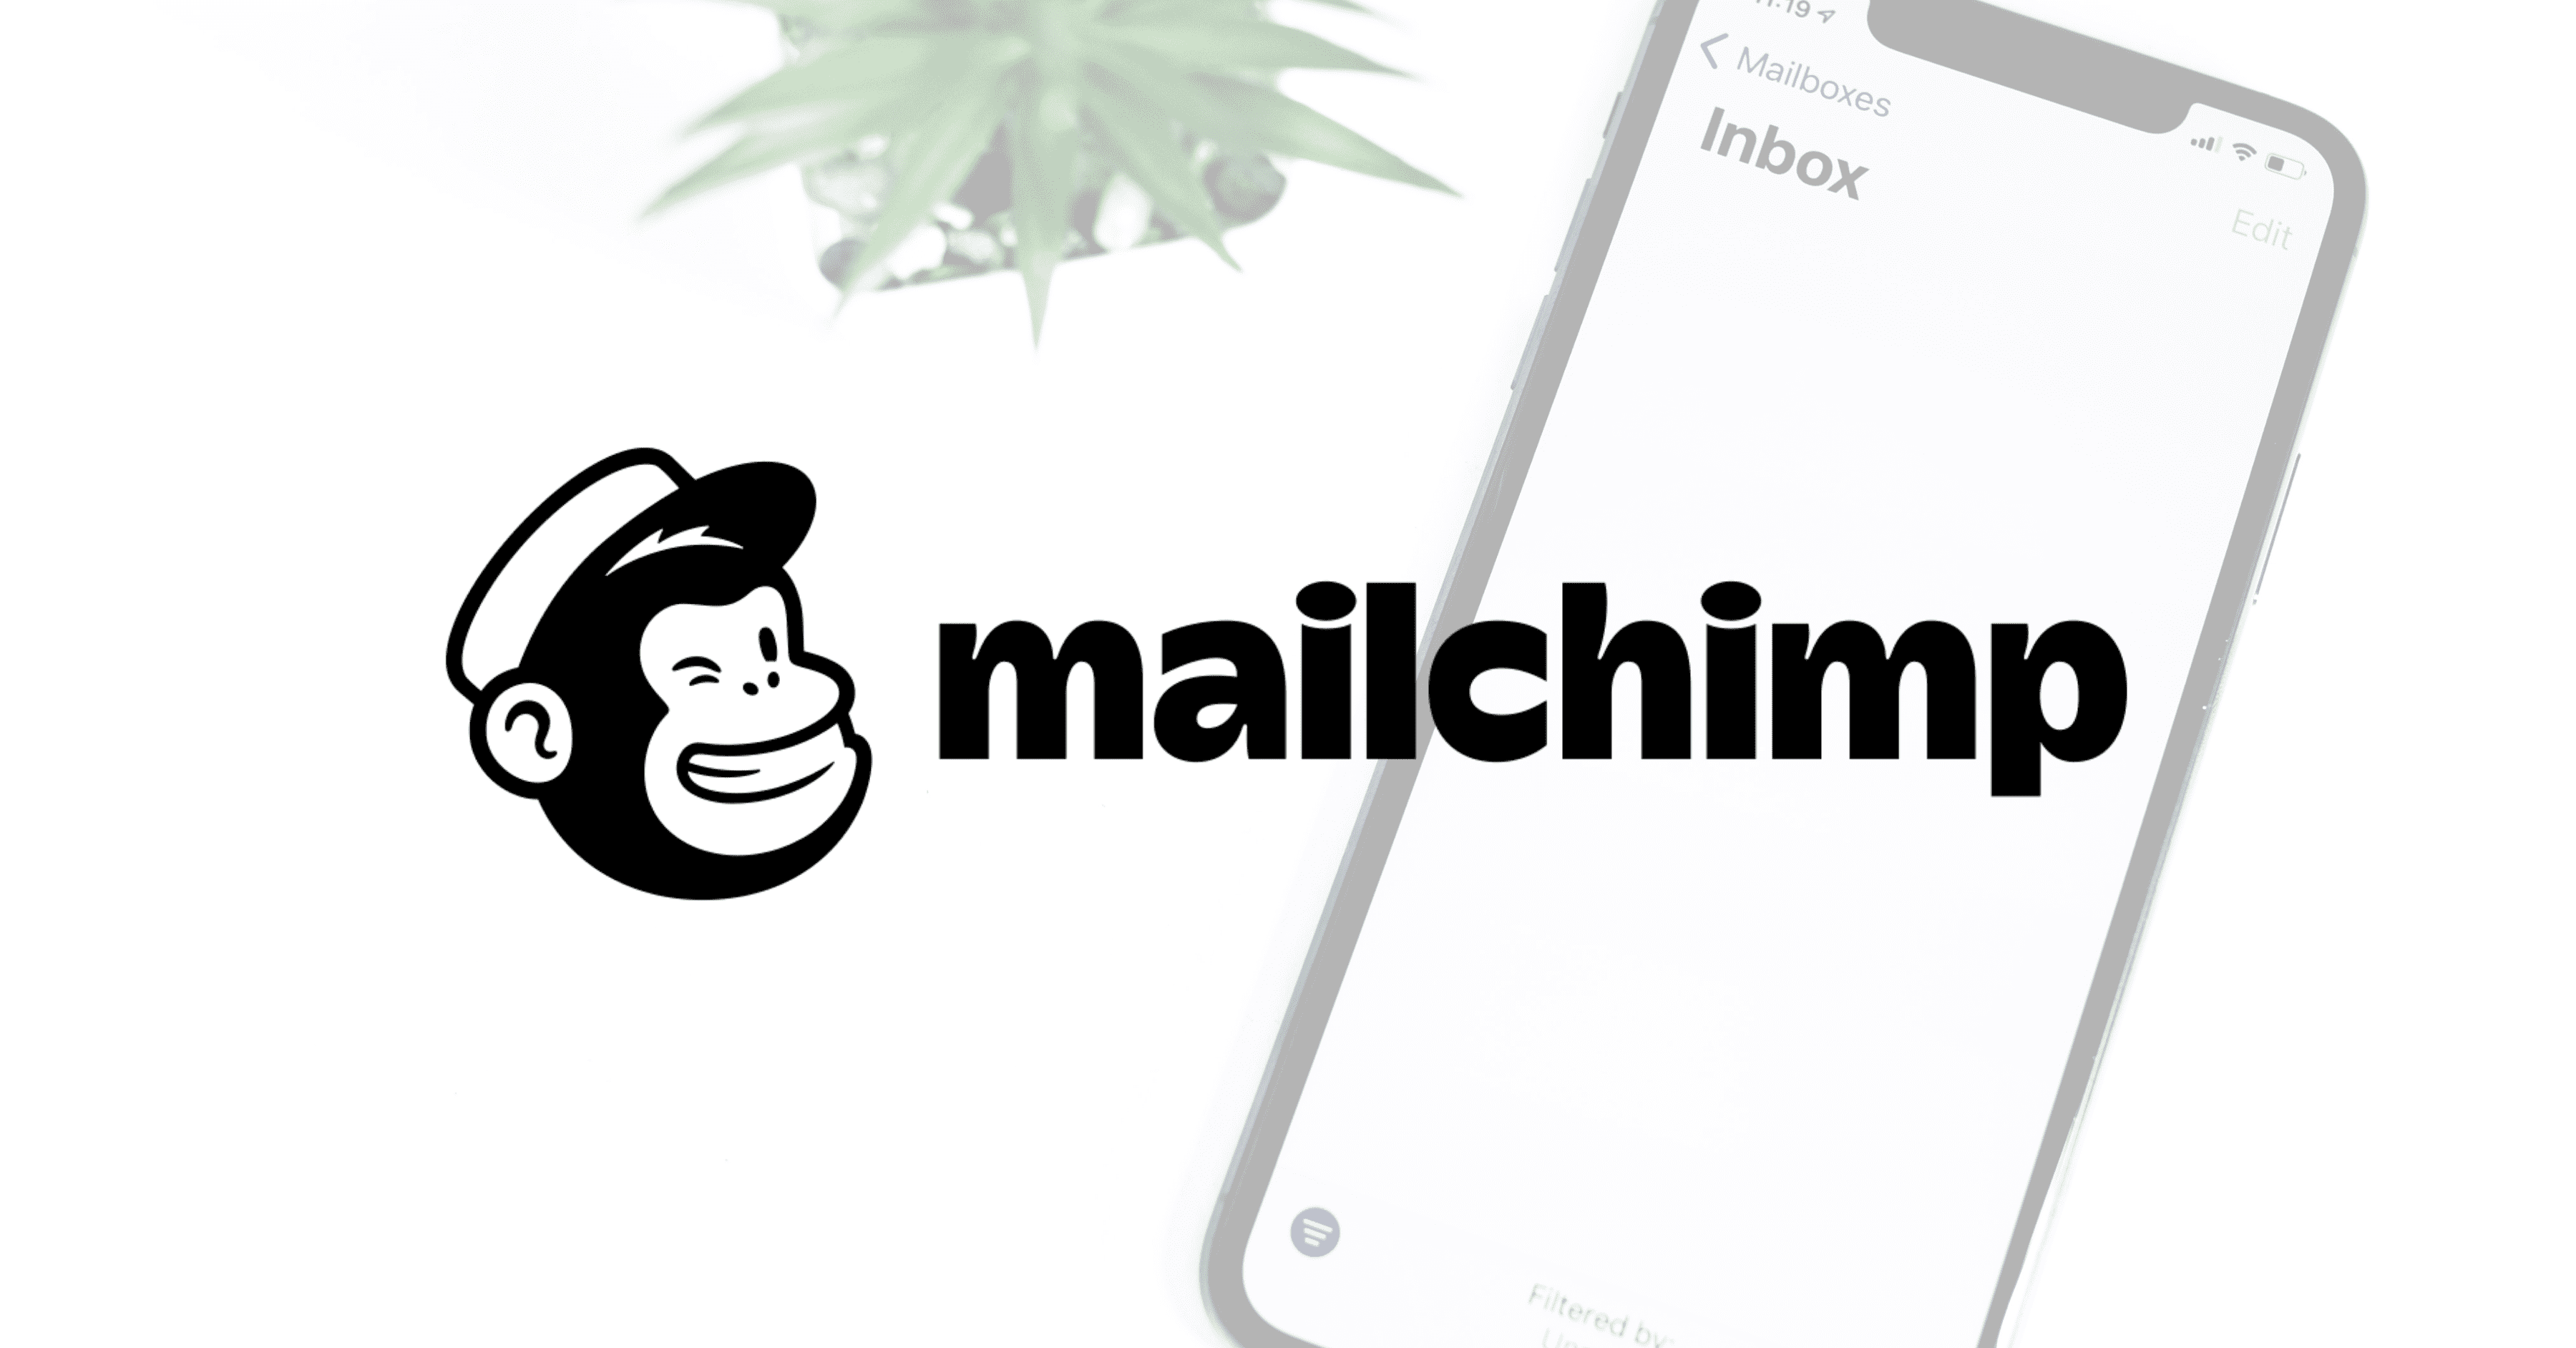 Mailchimp Email Marketing: A Look At The Tool's Features